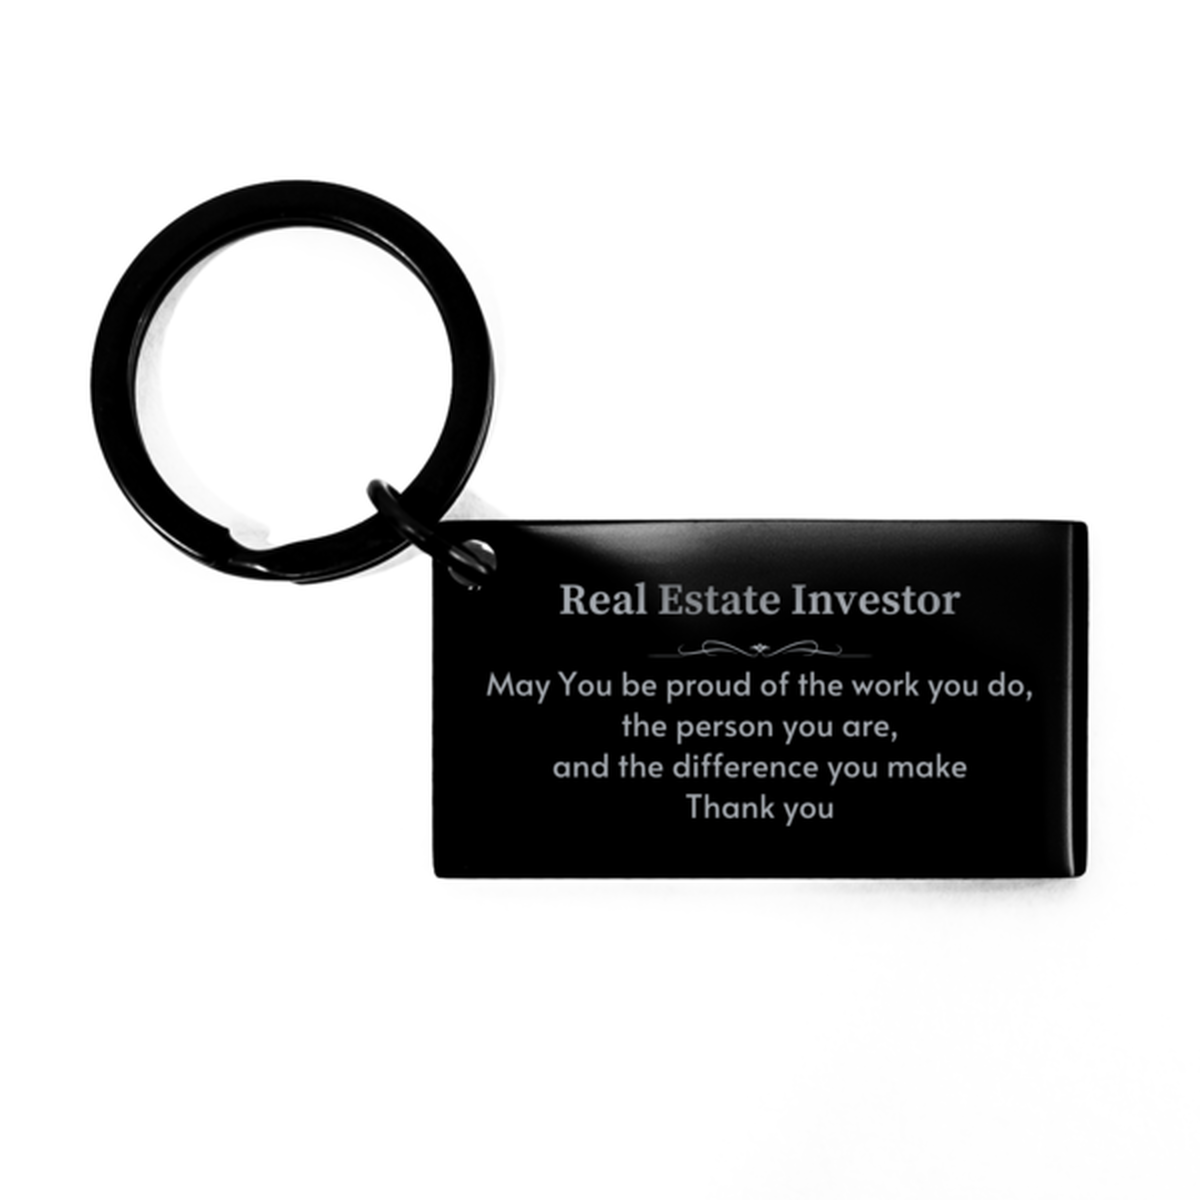 Heartwarming Keychain Retirement Coworkers Gifts for Real Estate Investor, Tax Preparer May You be proud of the work you do, the person you are Gifts for Boss Men Women Friends